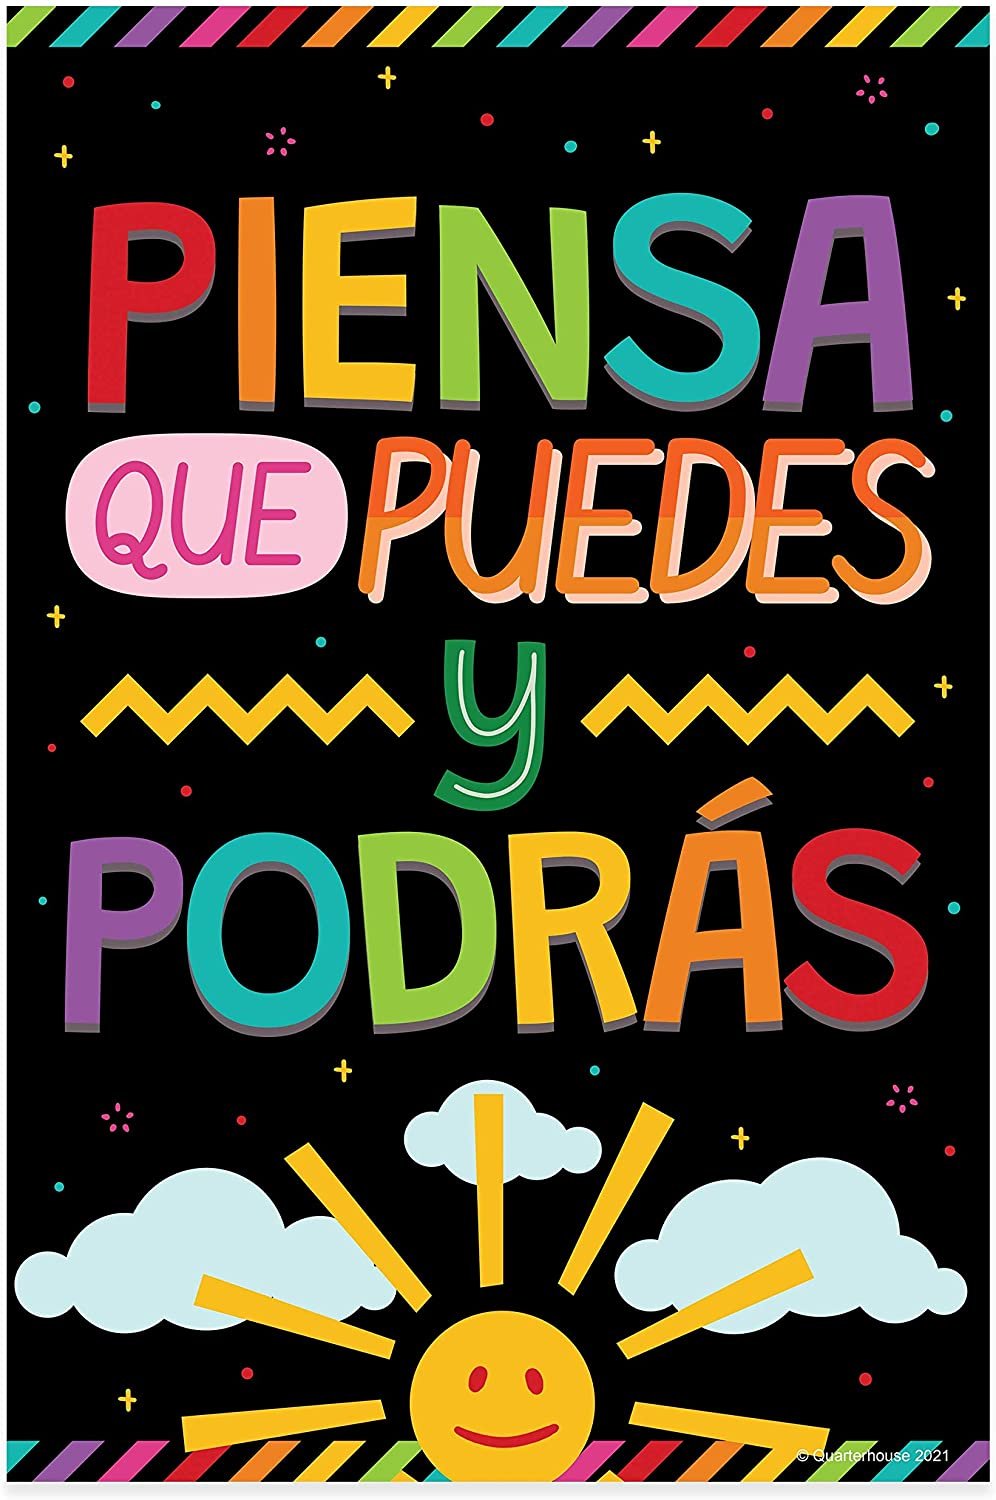 Quarterhouse Spanish Motivational (Black) Poster Set, Spanish Classroom Learning Materials for K-12 Students and Teachers, Set of 12, 12 x 18 Inches, Extra Durable